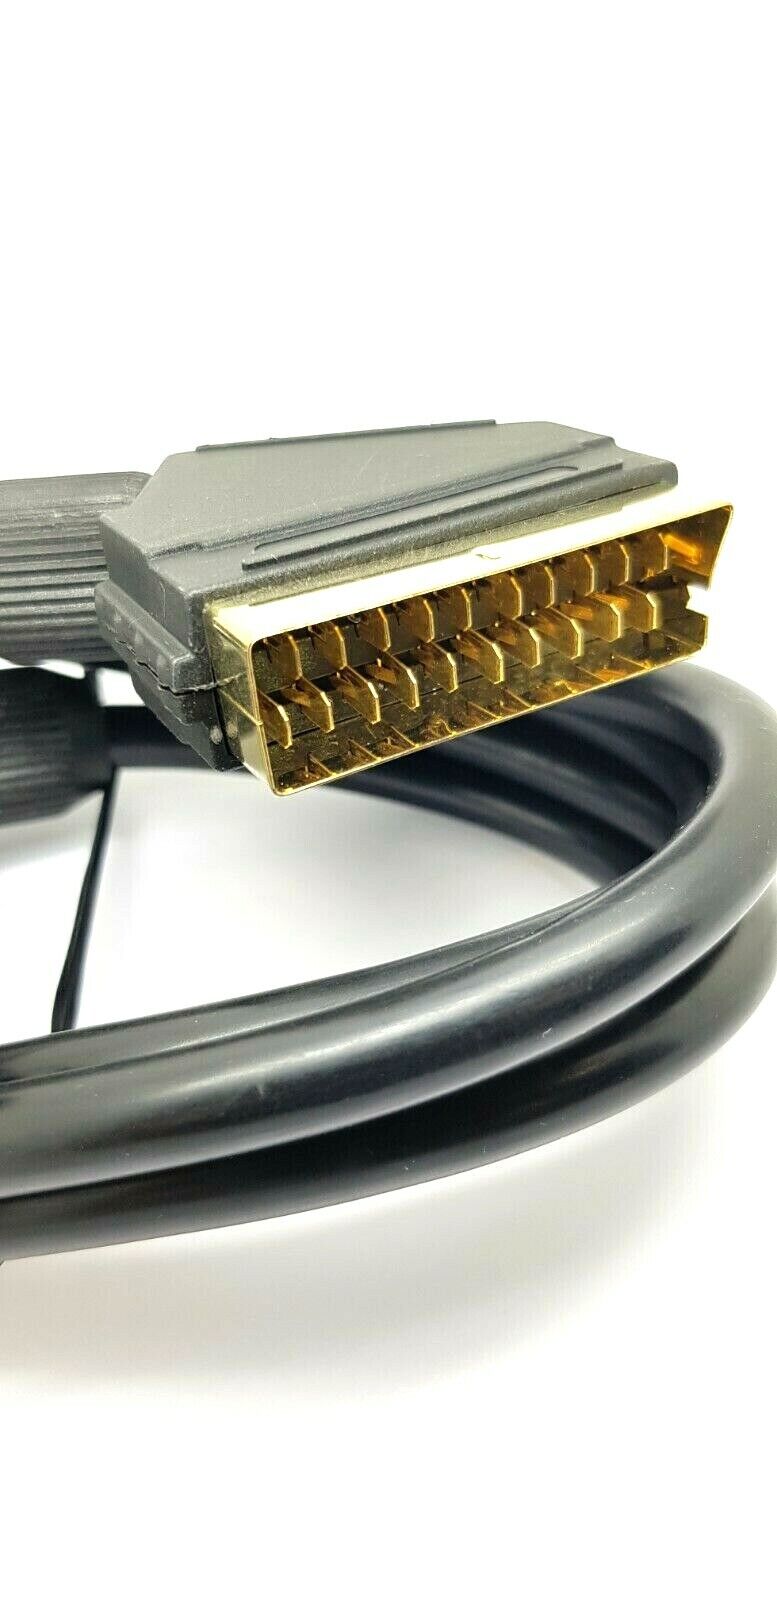 10 m Scart Cable Lead 21 Lead Pin Gold Video TV VCR DVD